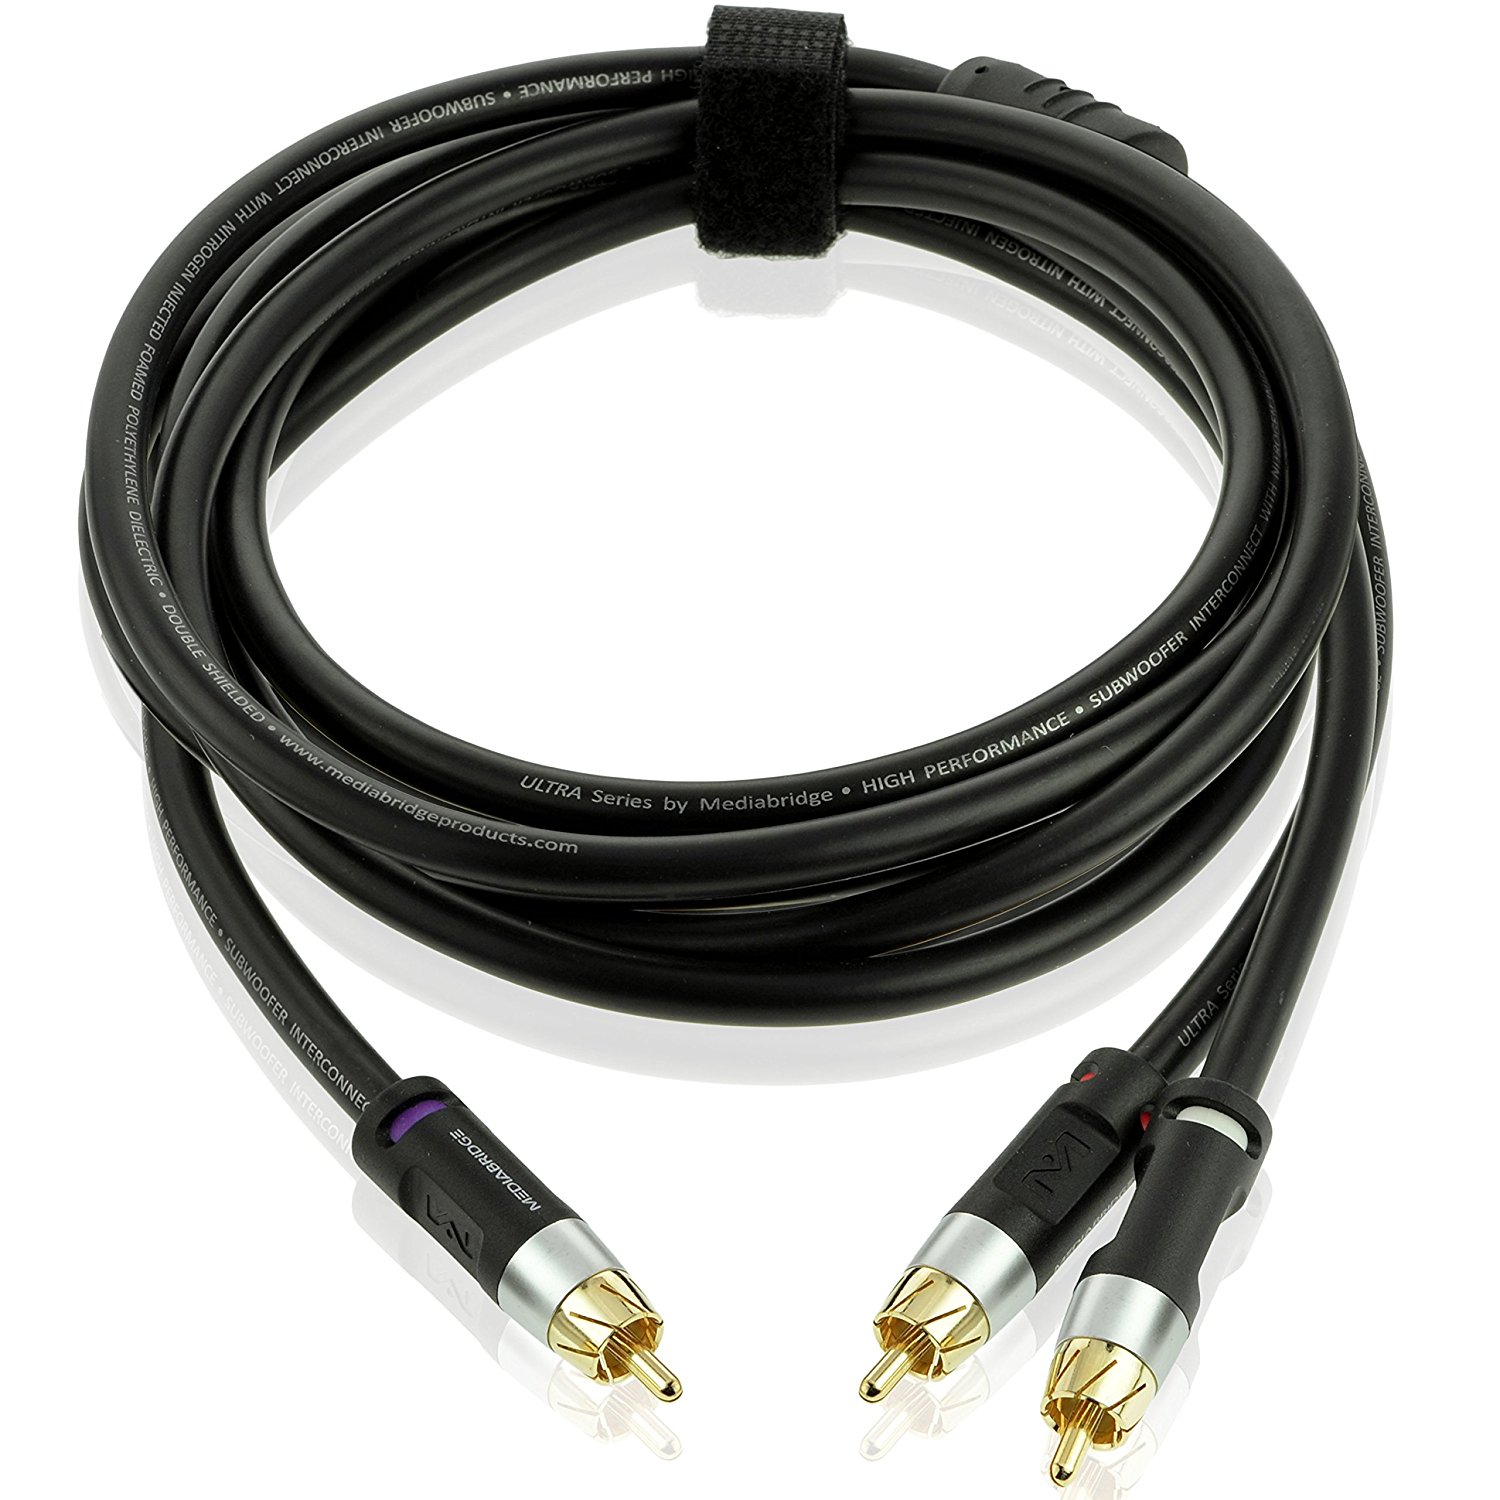 Mediabridge ULTRA Series RCA Y-Adapter (8 Feet) - 1-Male to 2-Male for Digital Audio or Subwoofer - Dual Shielded with RCA to RCA Gold-Plated Connectors - Black - (Part# CYA-1M2M-8B ) - image 1 of 4